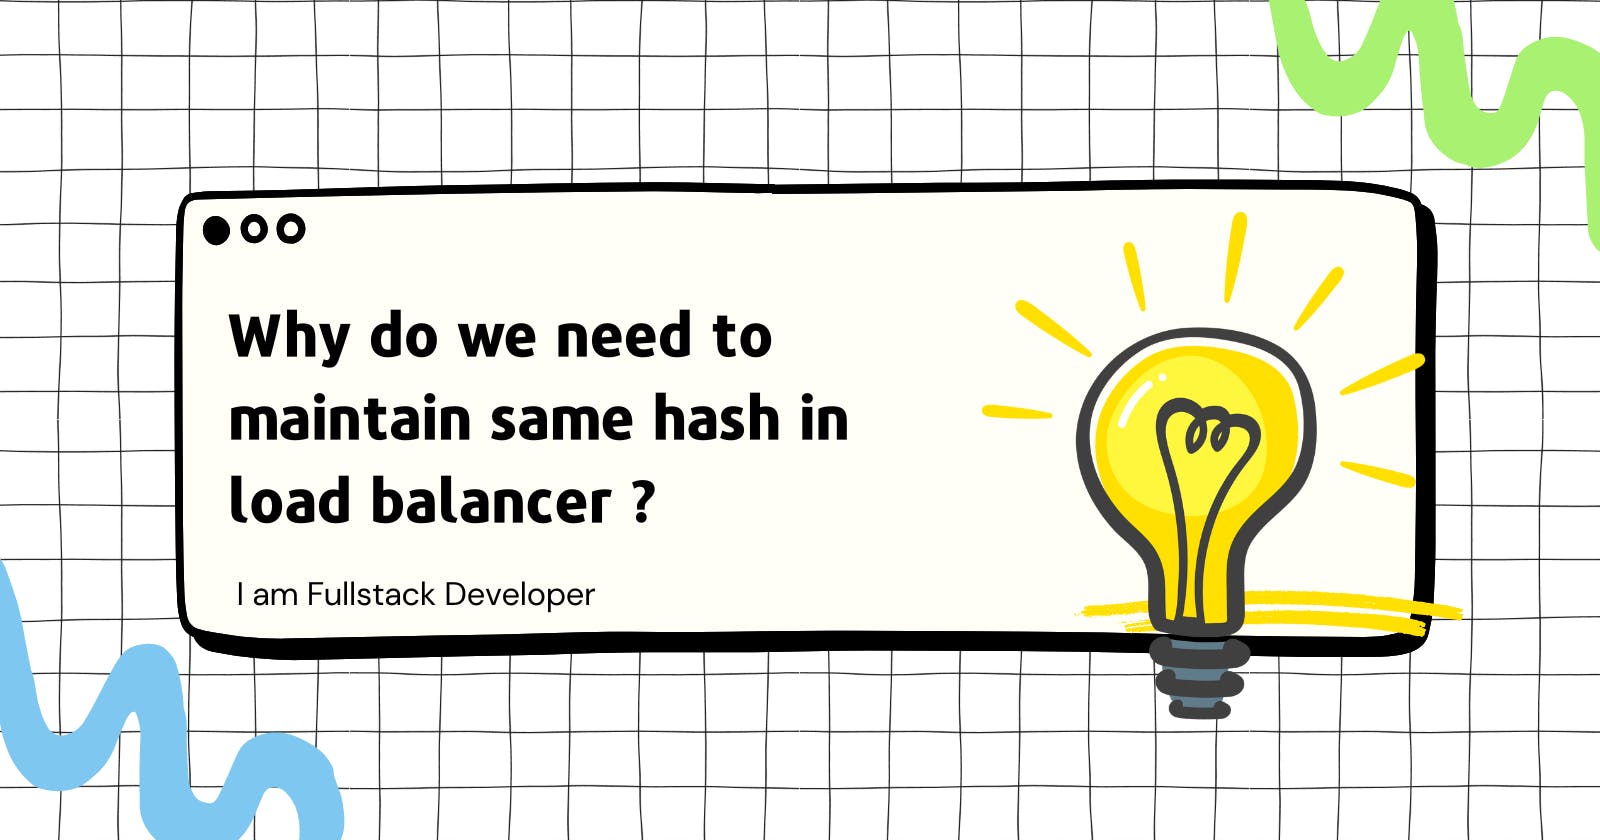 Why do we need to maintain same hash in load balancer ?